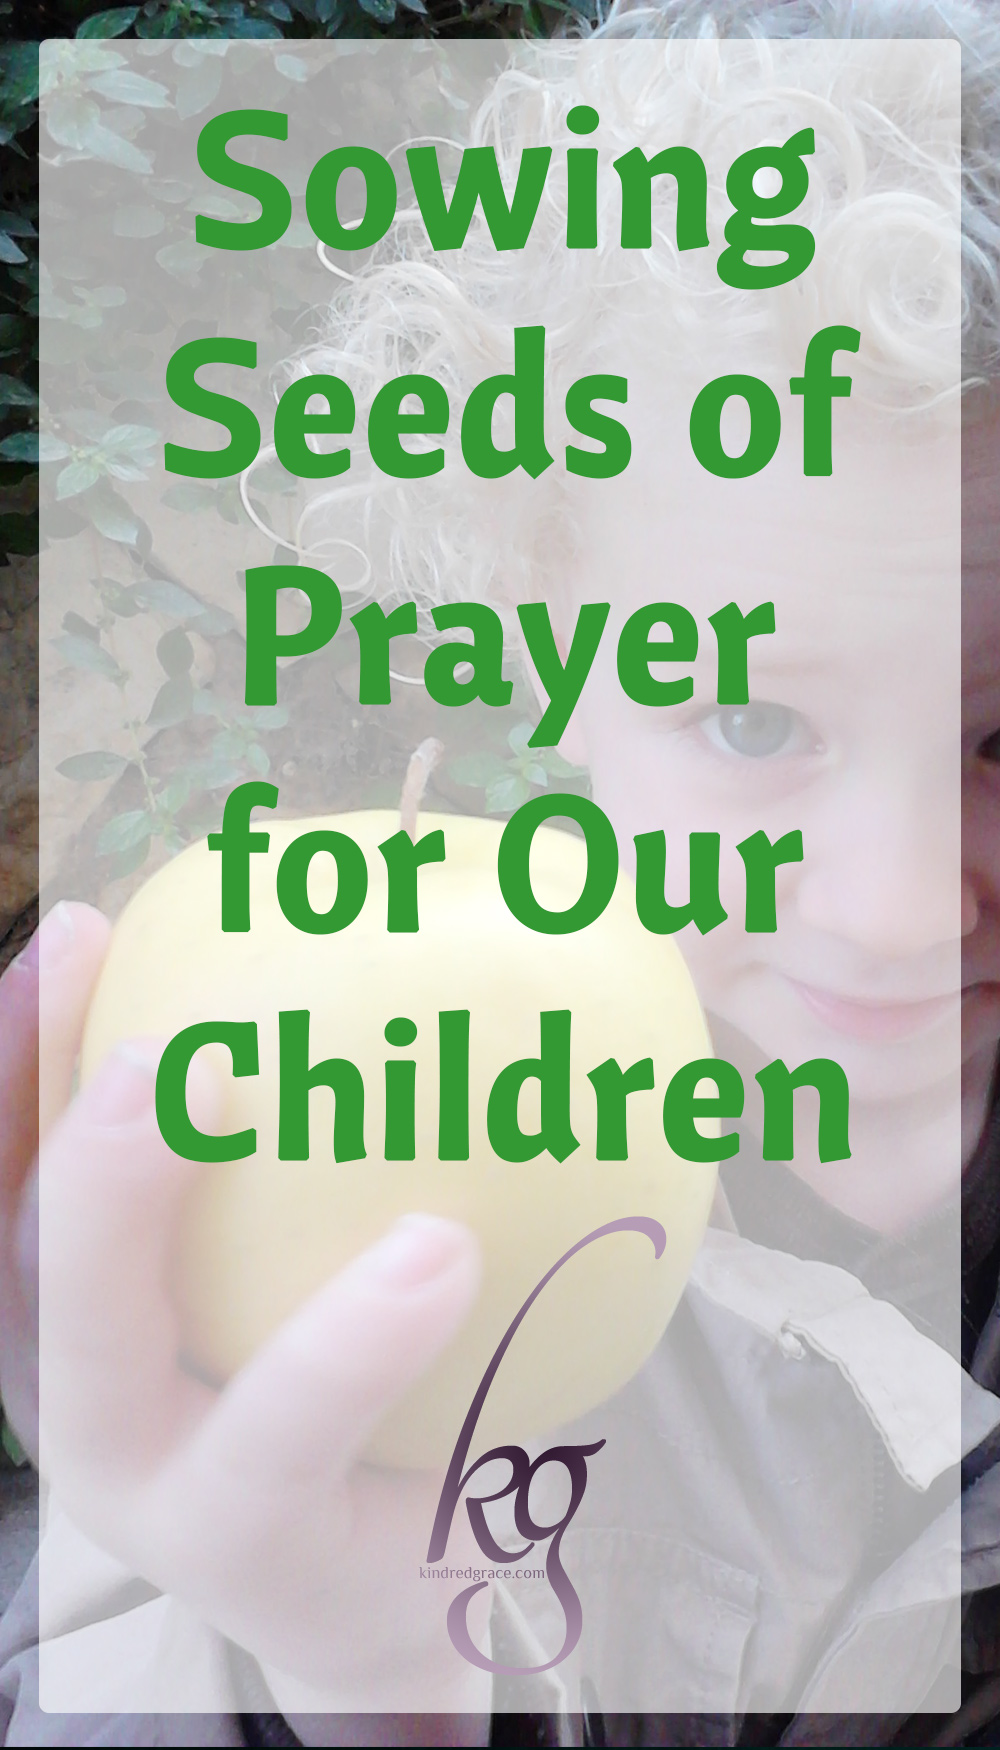 In my early single days, it simply never occurred to me to pray for my children. After all, I didn't know if God would bless me with a husband.  Praying for my children seemed totally irrelevant until that first request was met. via @KindredGrace